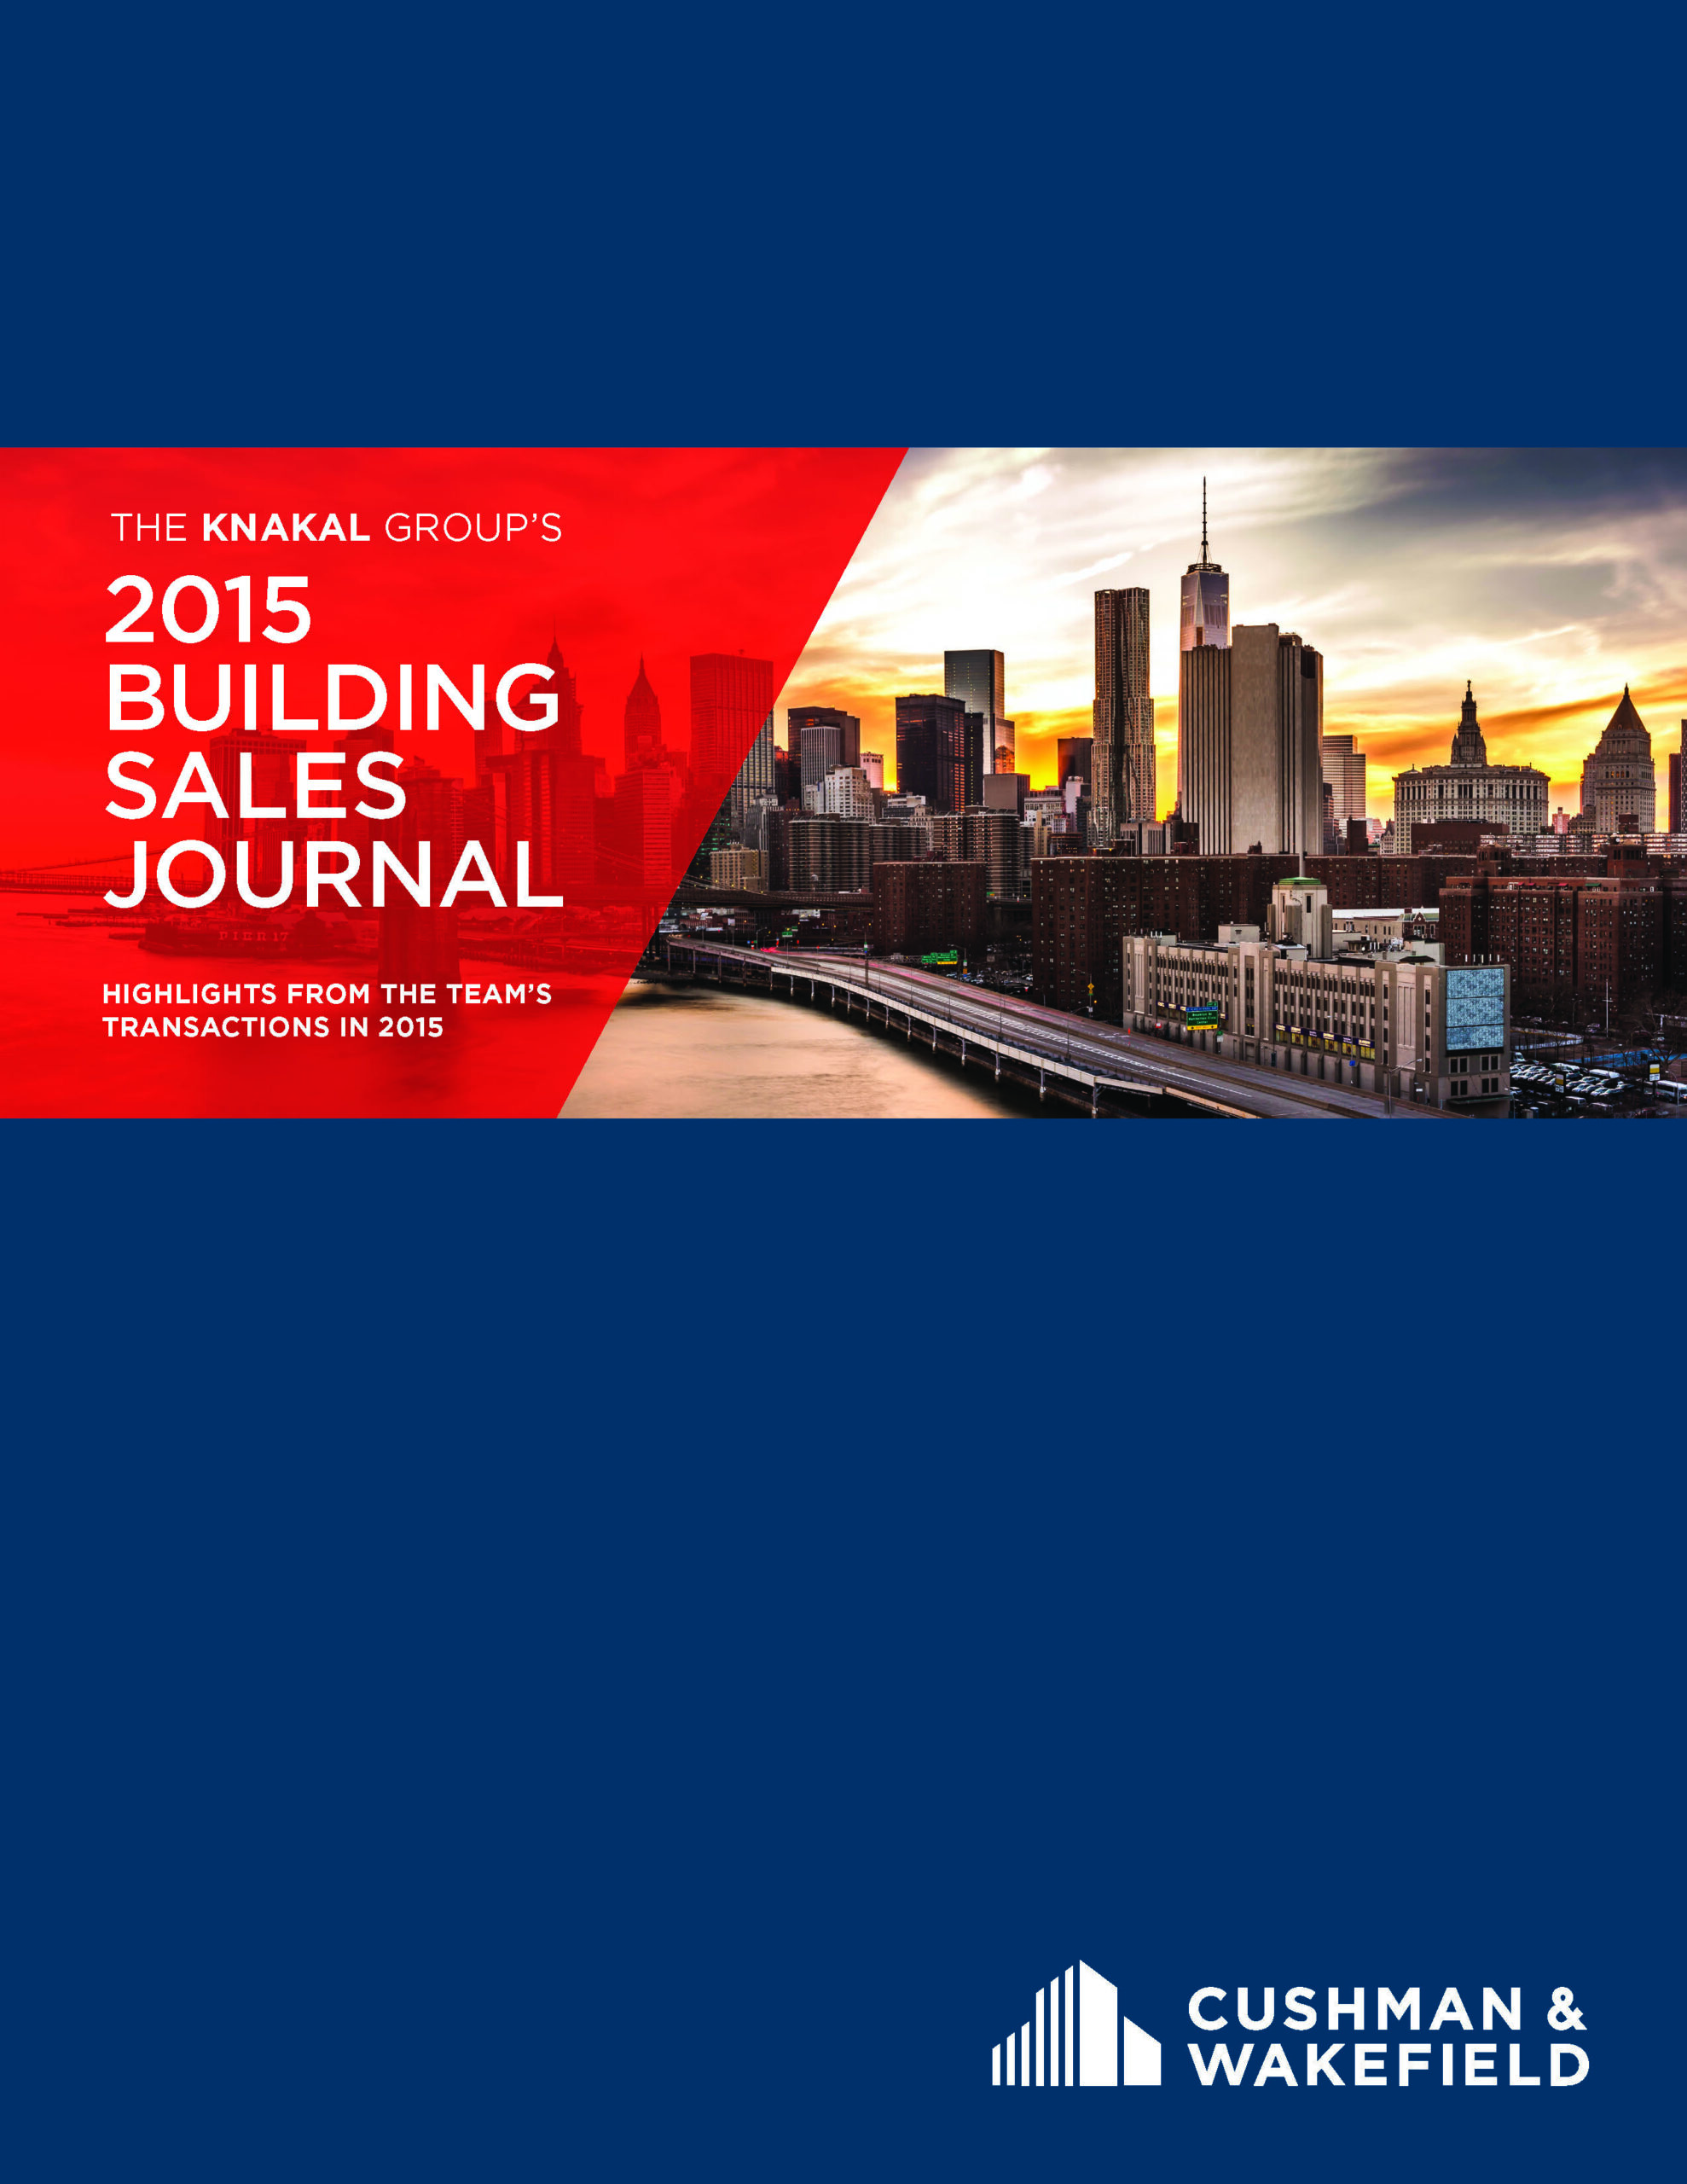 The Knakal Group 2015 Building Sales Journal scaled